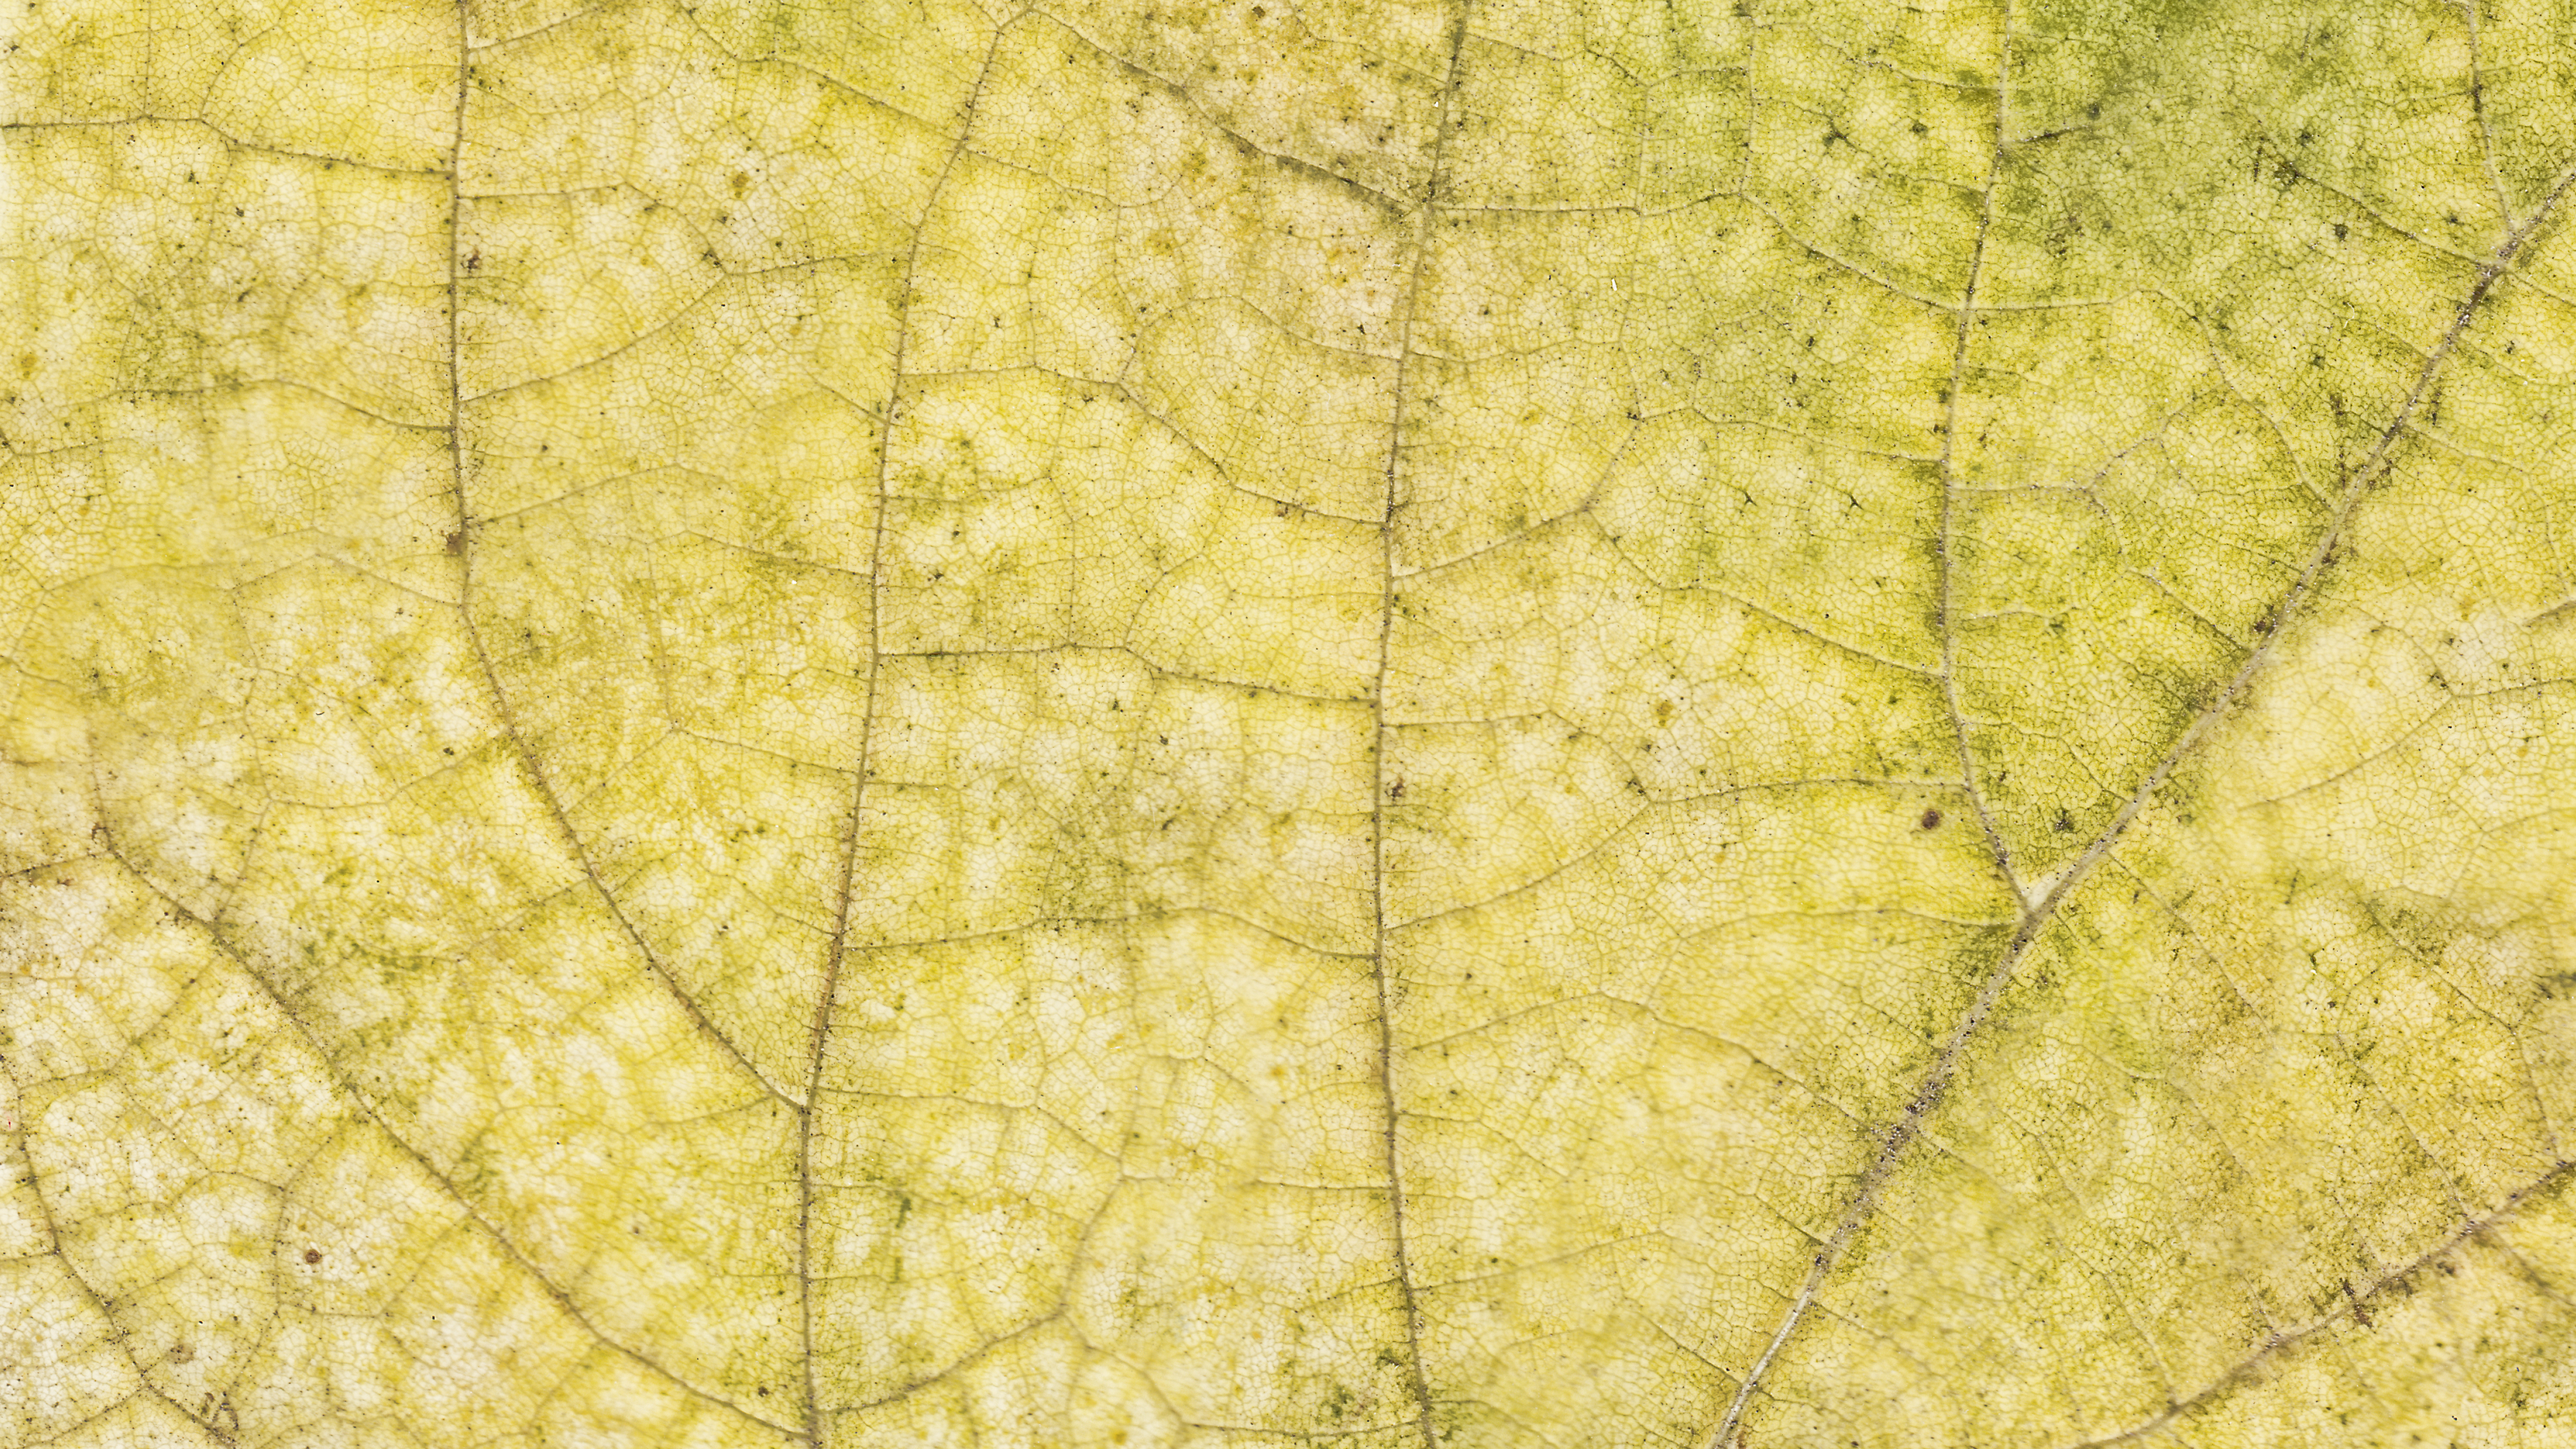 dry leaf texture background image